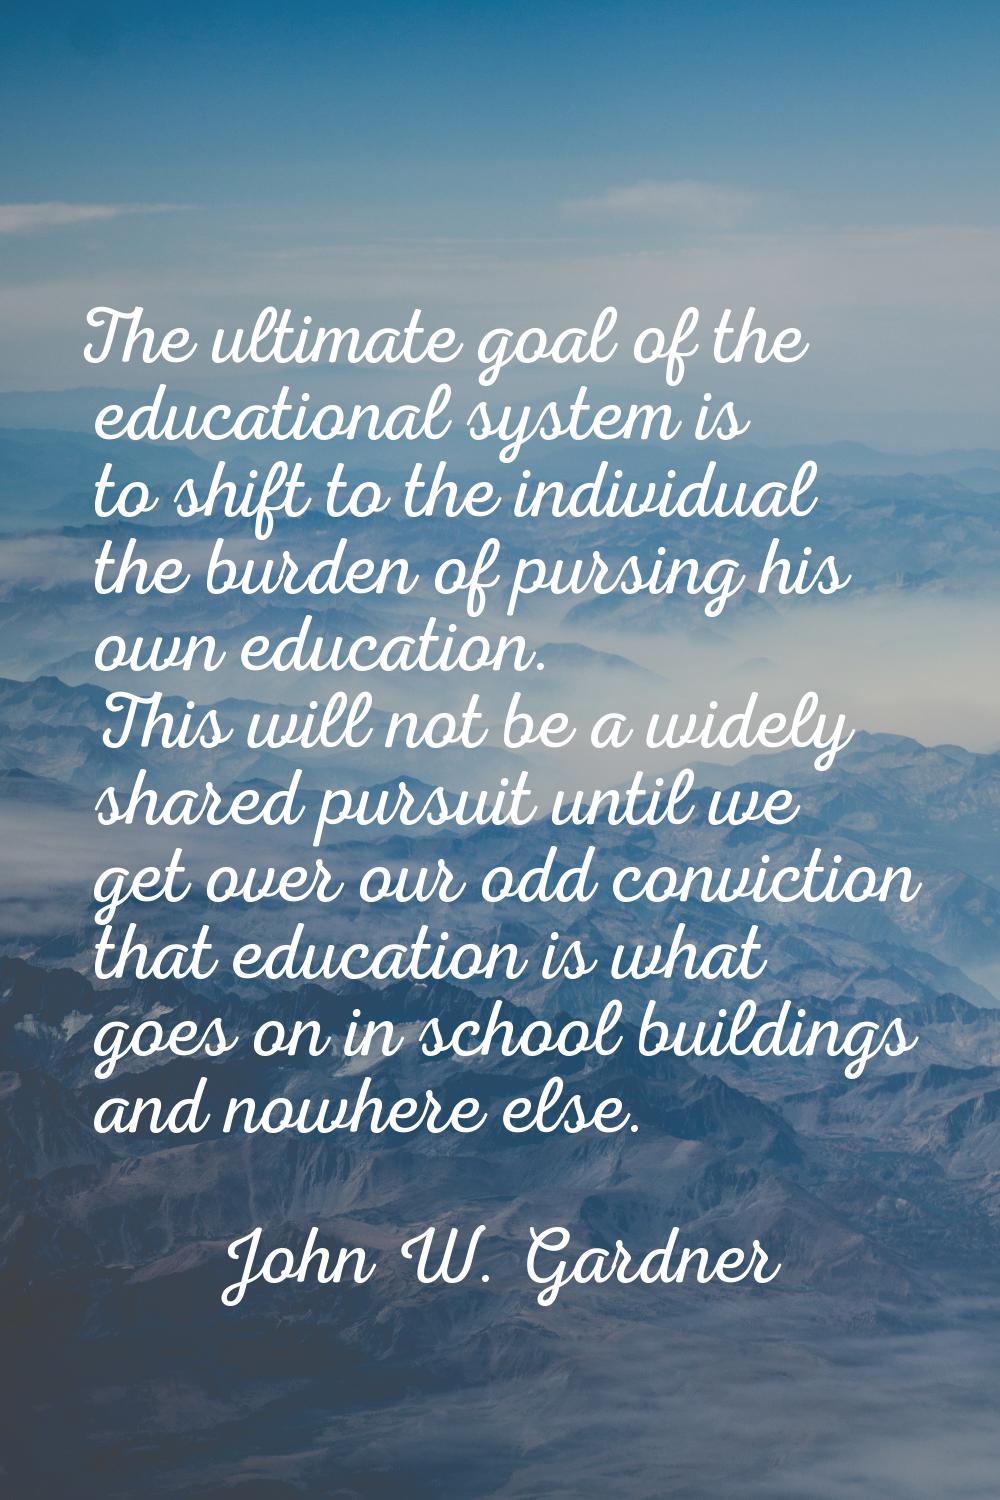 The ultimate goal of the educational system is to shift to the individual the burden of pursing his